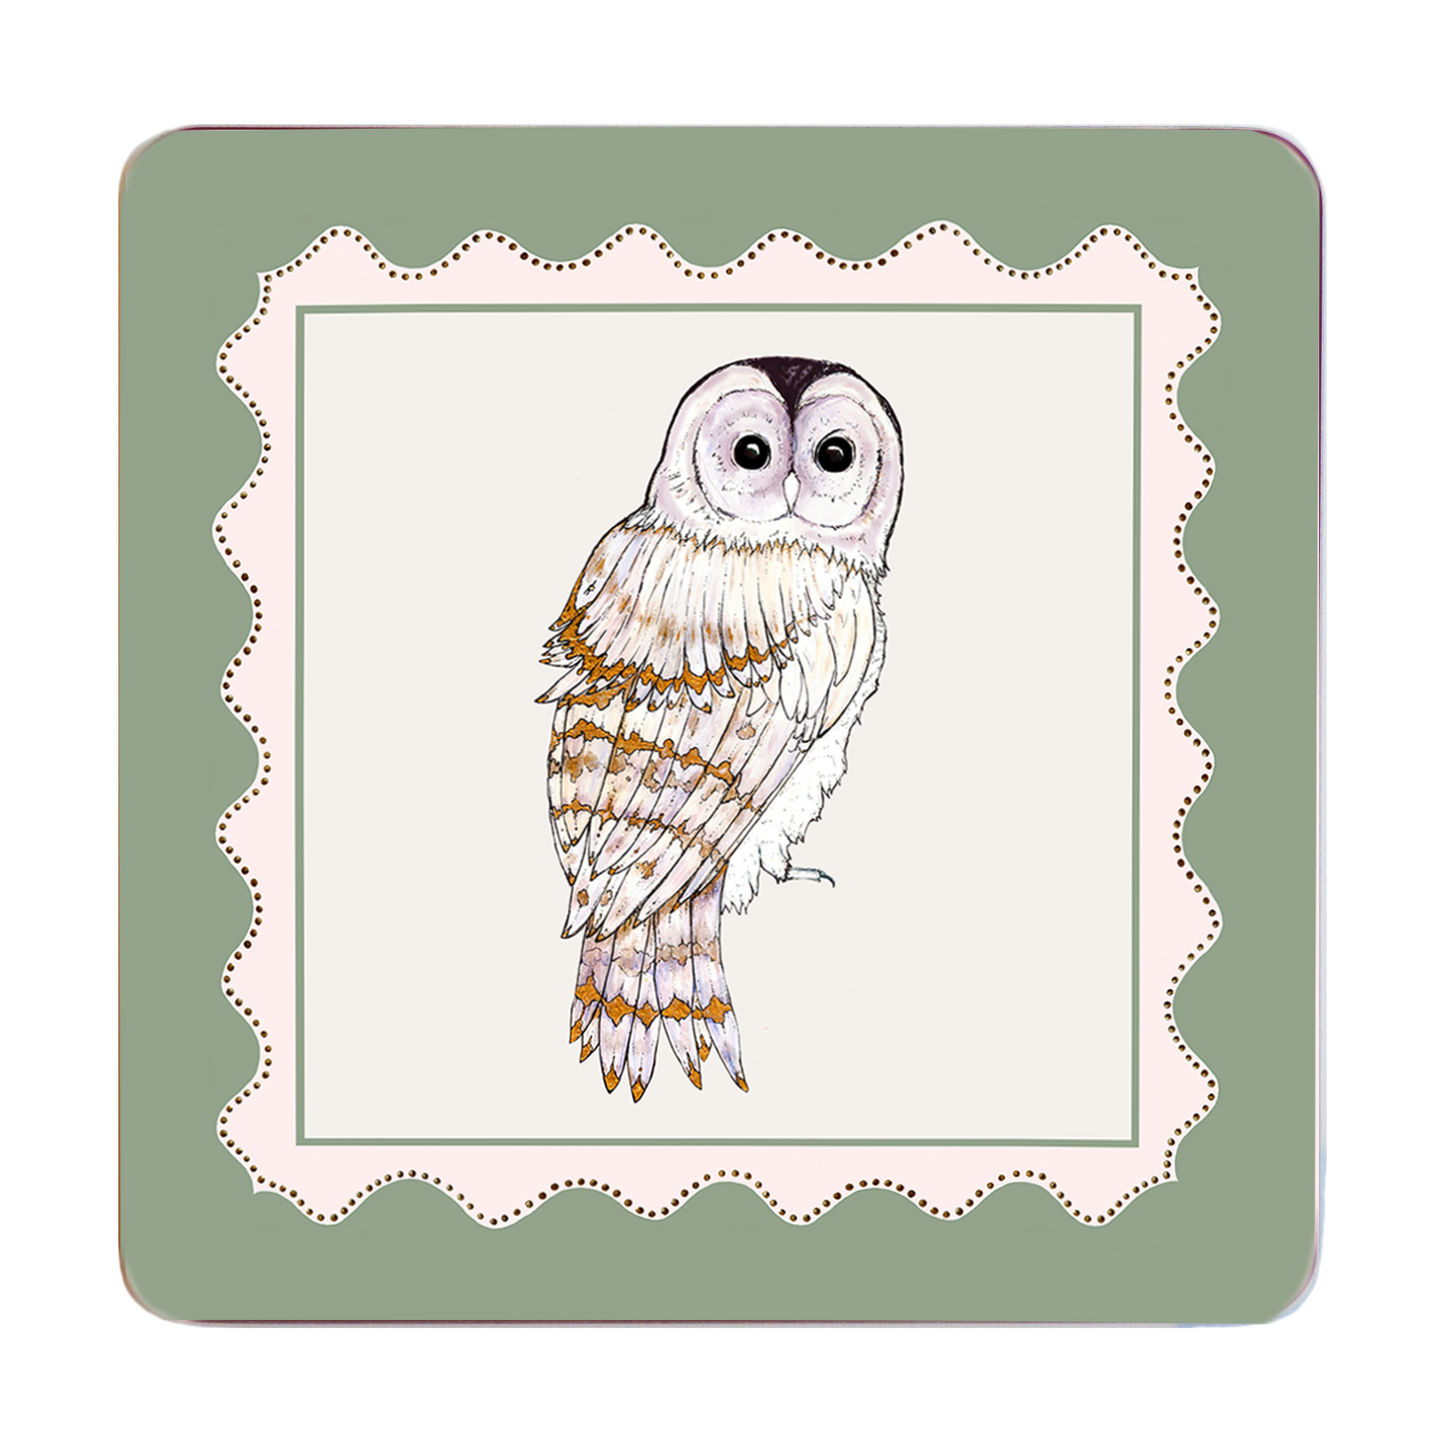 The Barn Owl Placemat